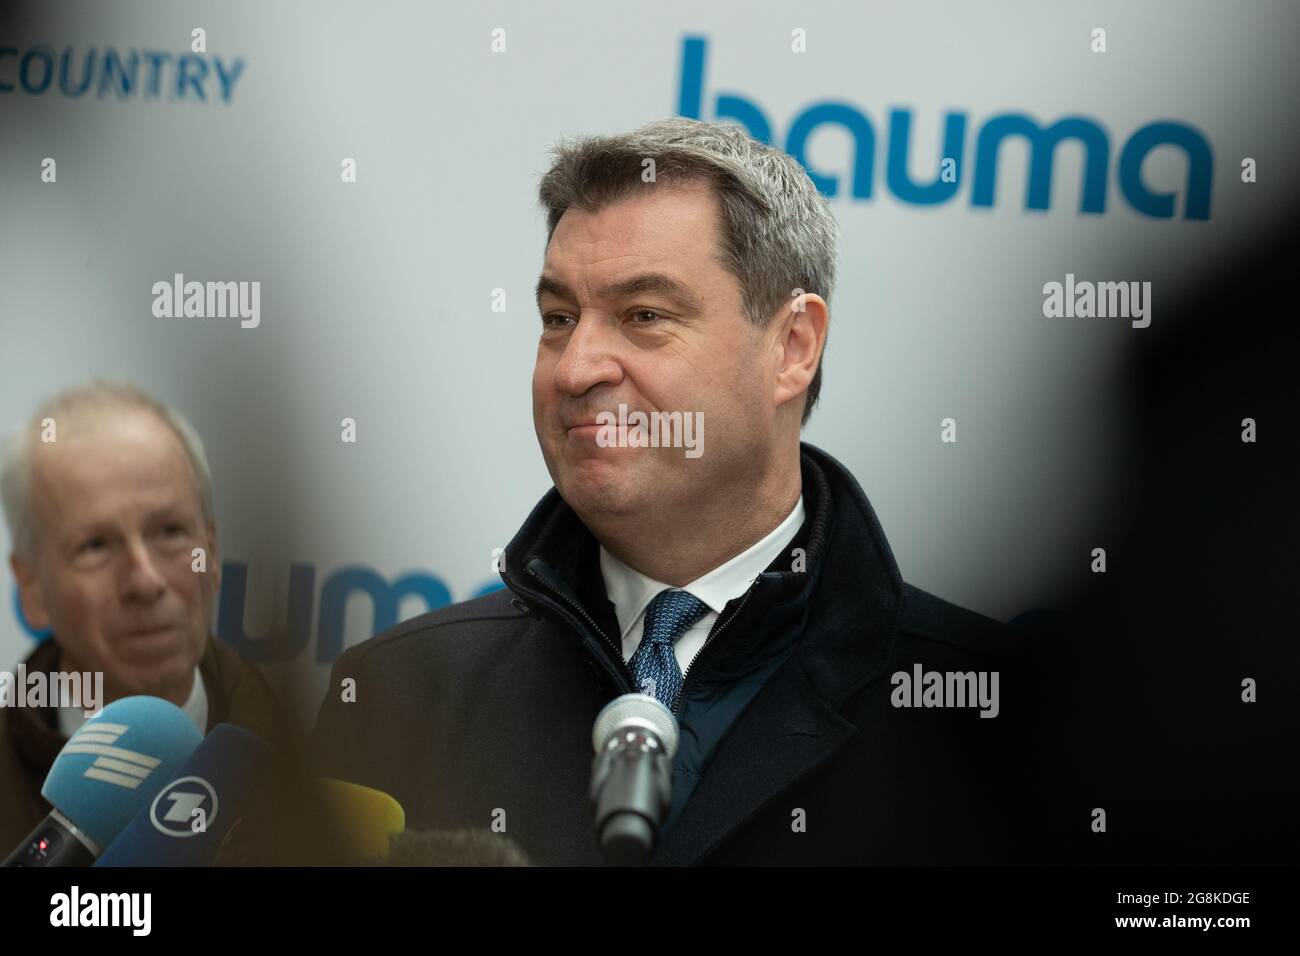 Markus Soeder. The German minister of Economy and Energy Peter Altmaier ( CDU ) and the Bavarian Prime Minister Markus Soeder ( CSU ) made a tour through the world's biggest fair Bauma. Bauma starts on 8.4.2019 and ends on 14.4.2019 in Munich. (Photo by Alexander Pohl/Sipa USA) Stock Photo